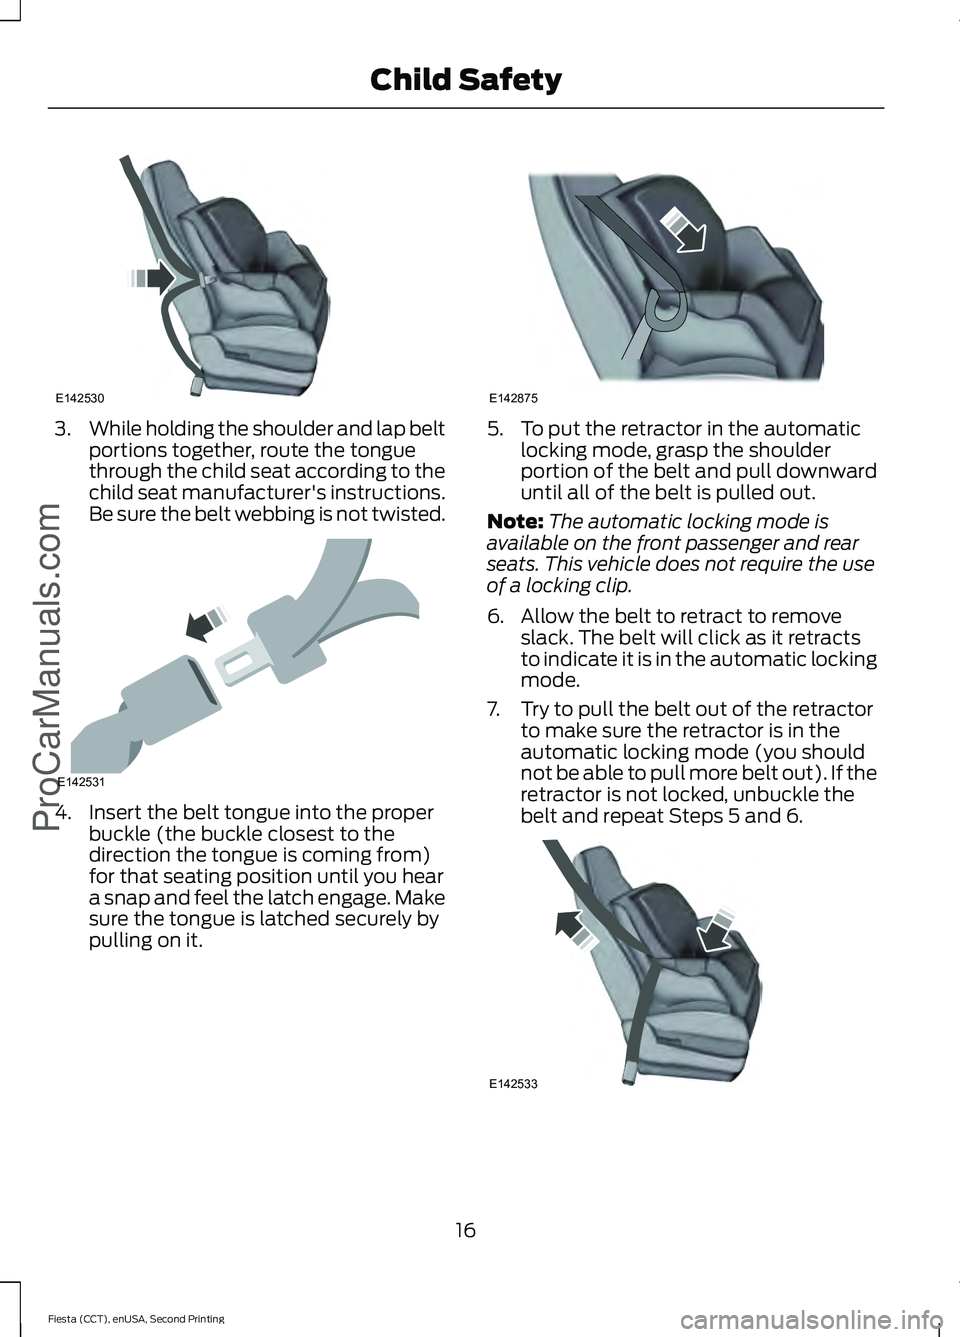 FORD FIESTA 2015 User Guide 3.
While holding the shoulder and lap belt
portions together, route the tongue
through the child seat according to the
child seat manufacturer's instructions.
Be sure the belt webbing is not twist